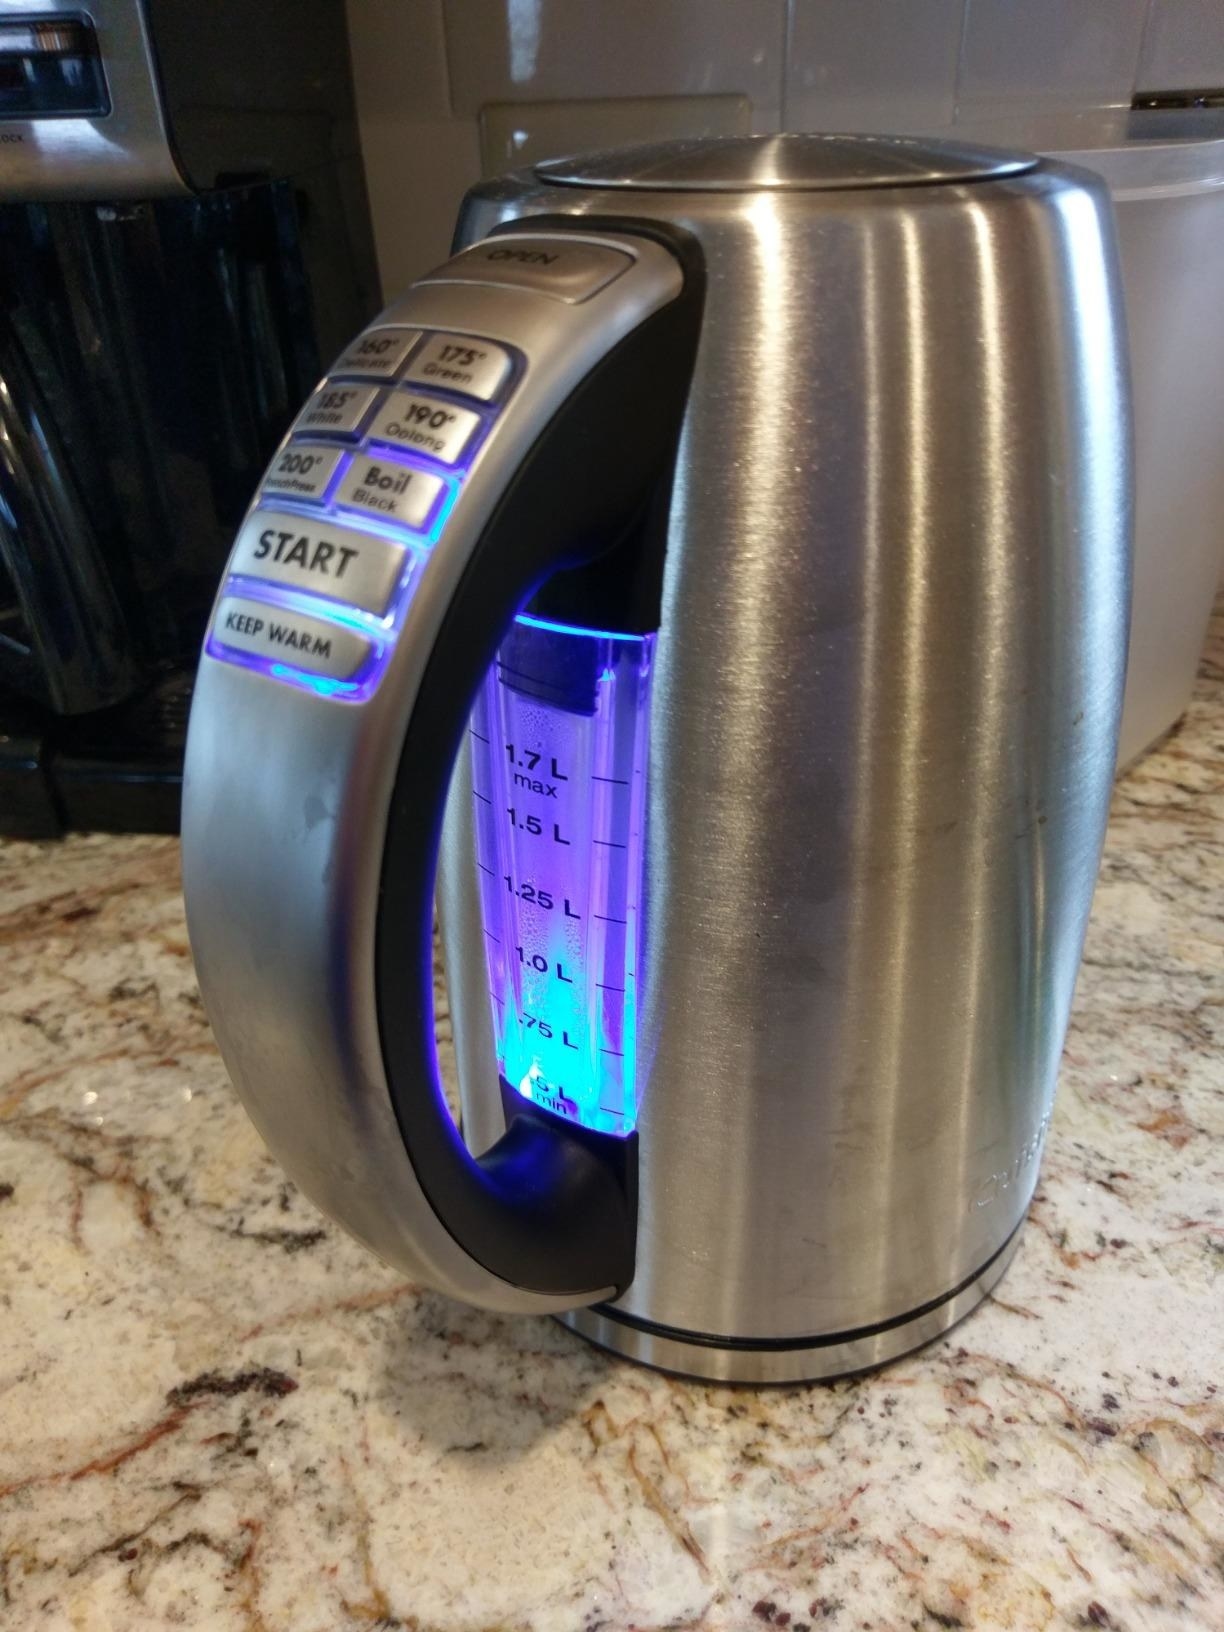 A metallic electric tea kettle with temperature buttons and measurements illuminated in blue light 